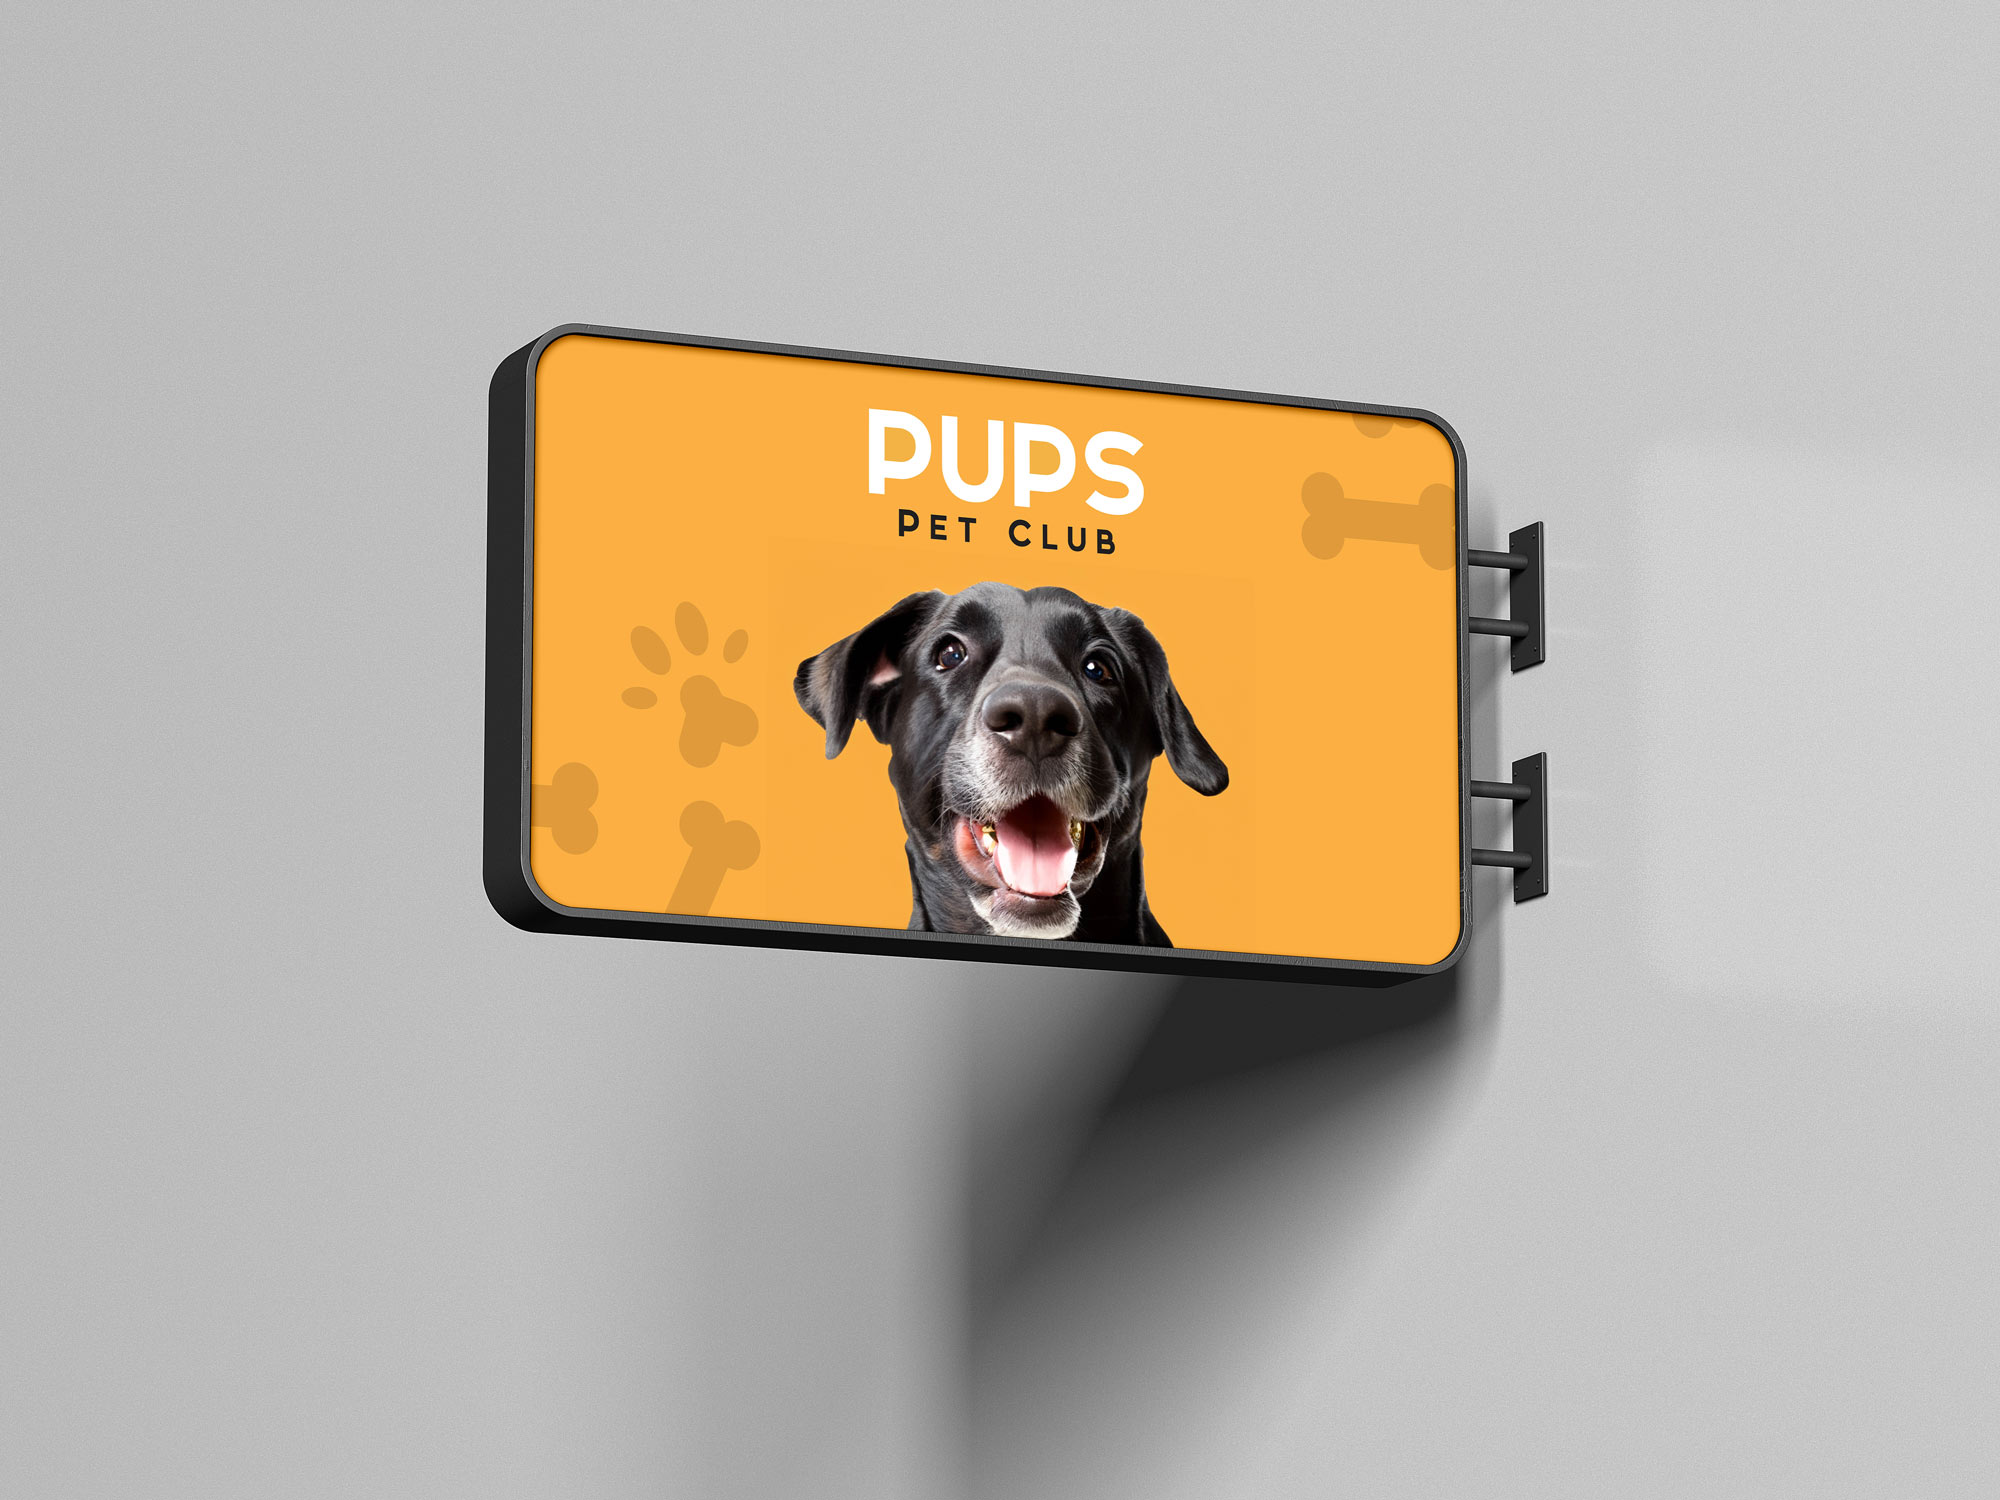 Brand identity billboard with pet oriented imagery.